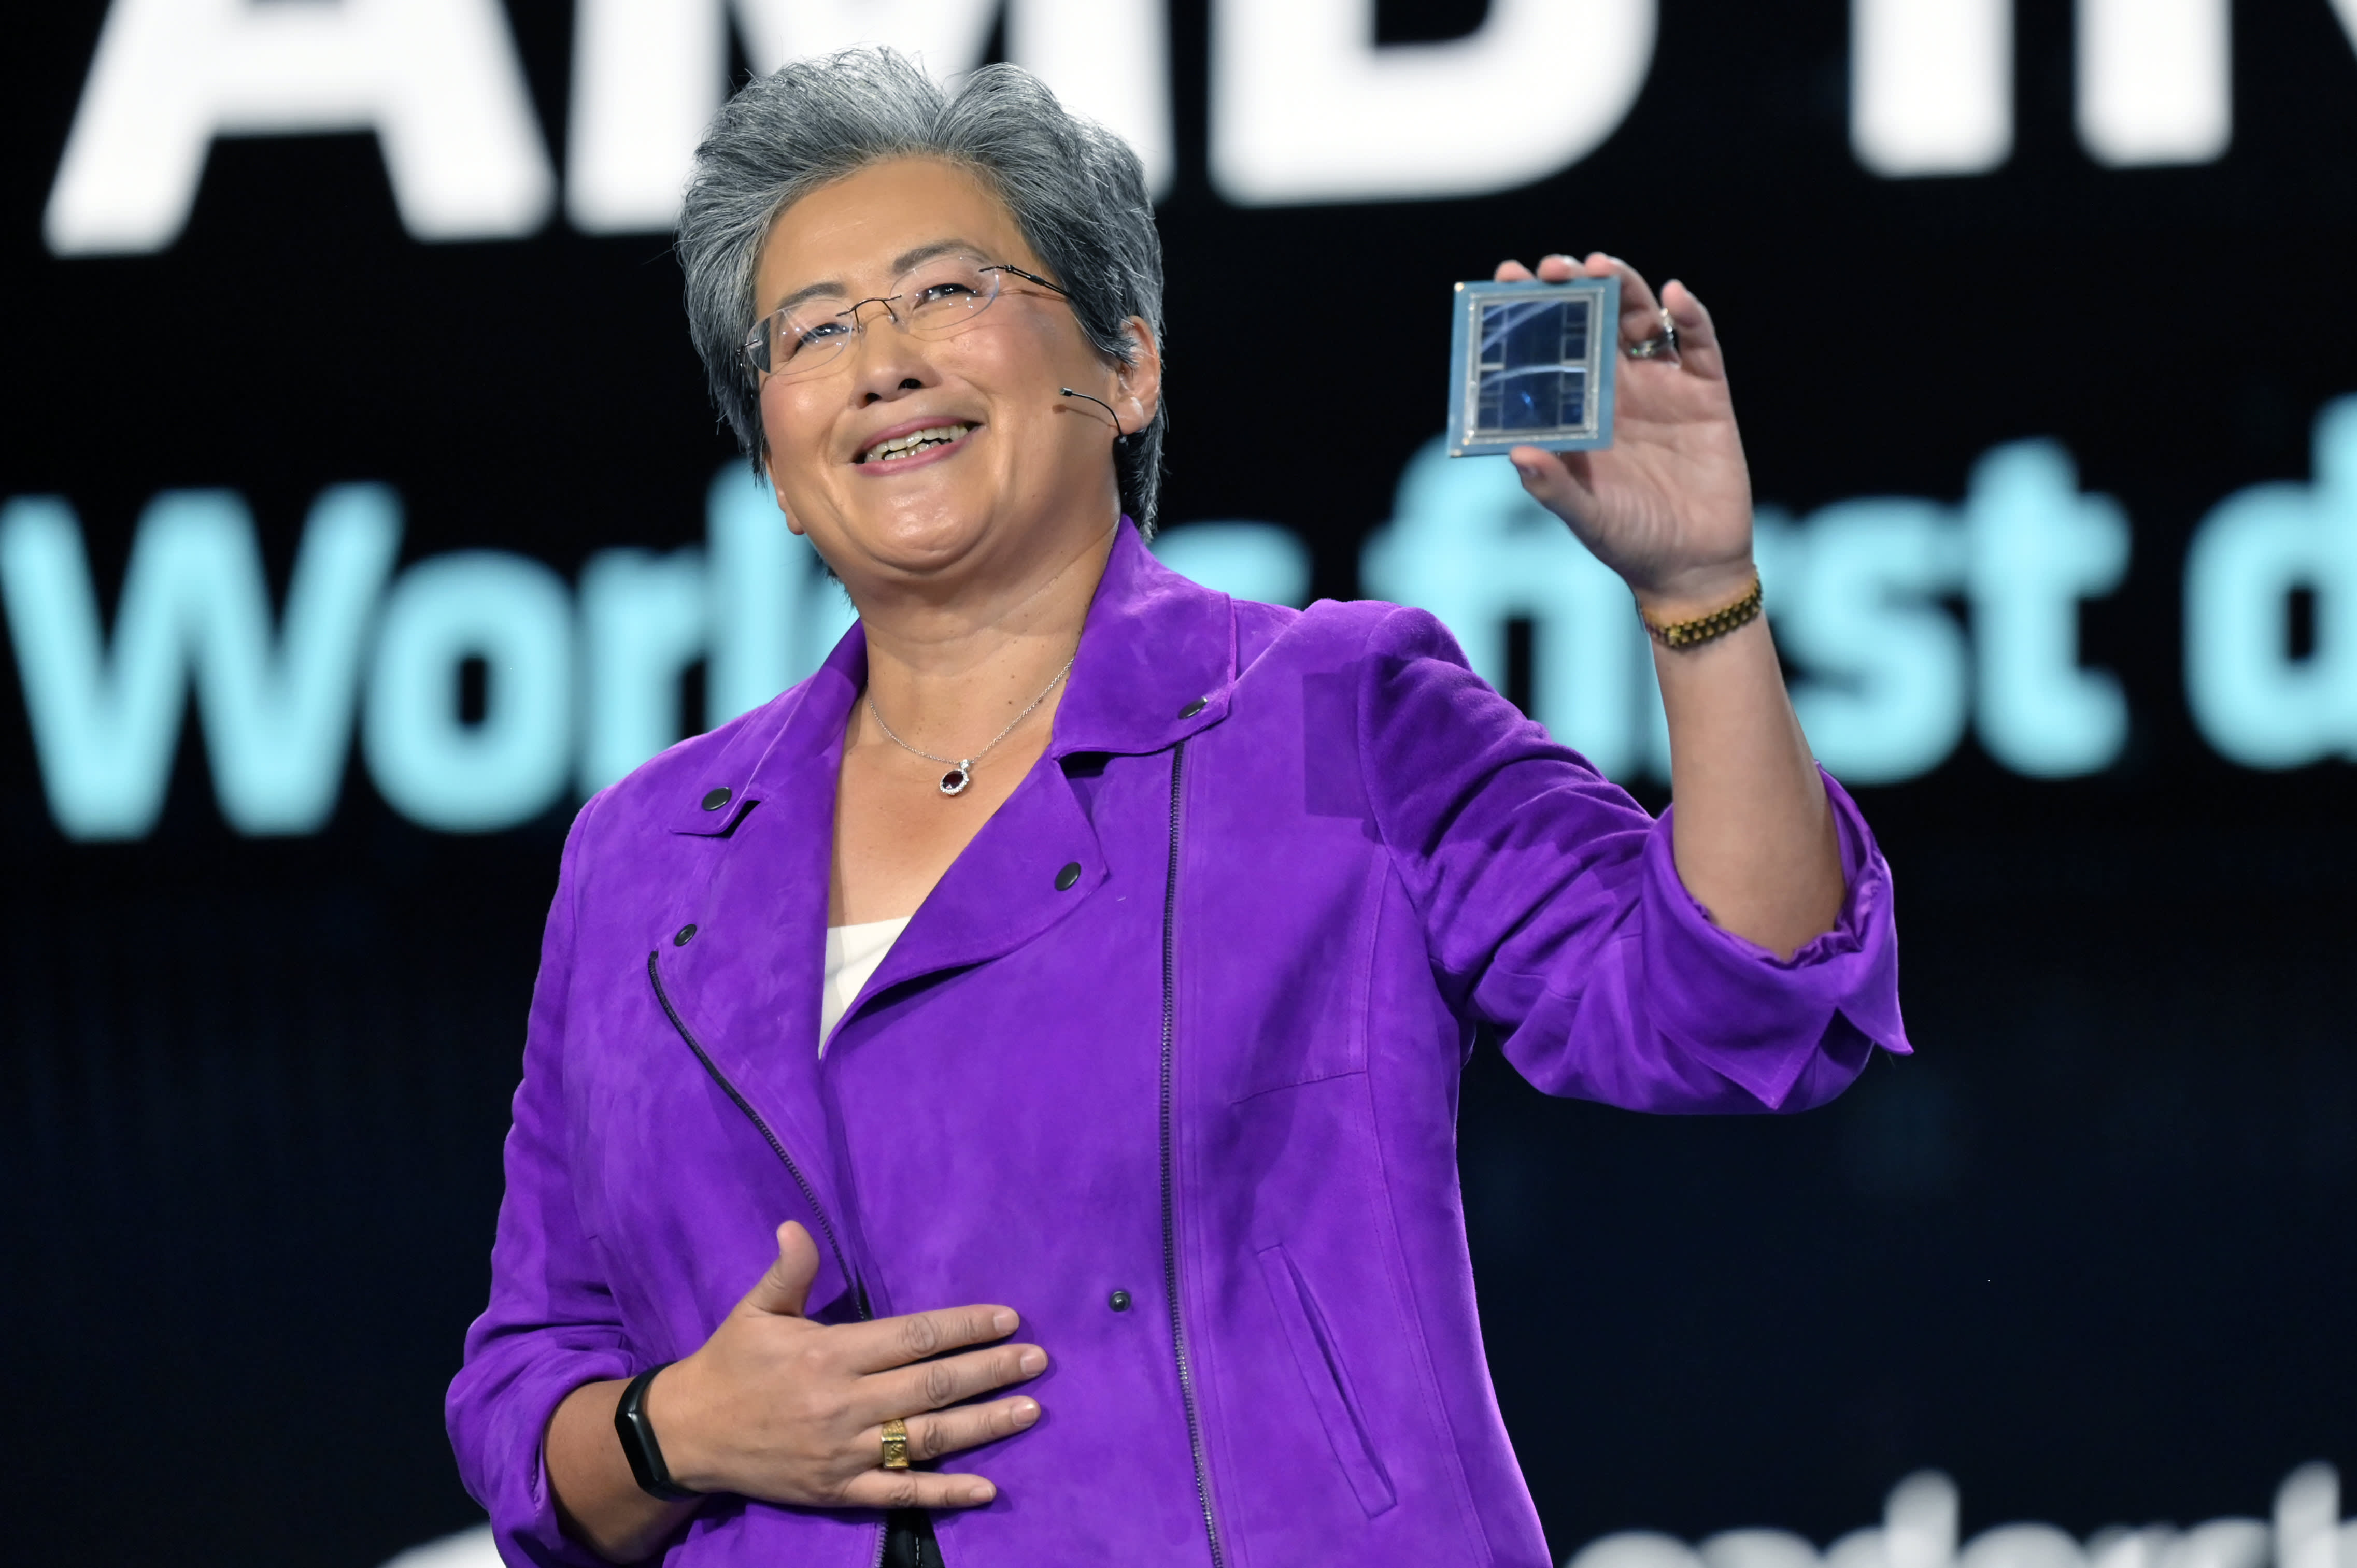 Meta and Microsoft to buy AMD’s new AI chip as alternative to Nvidia